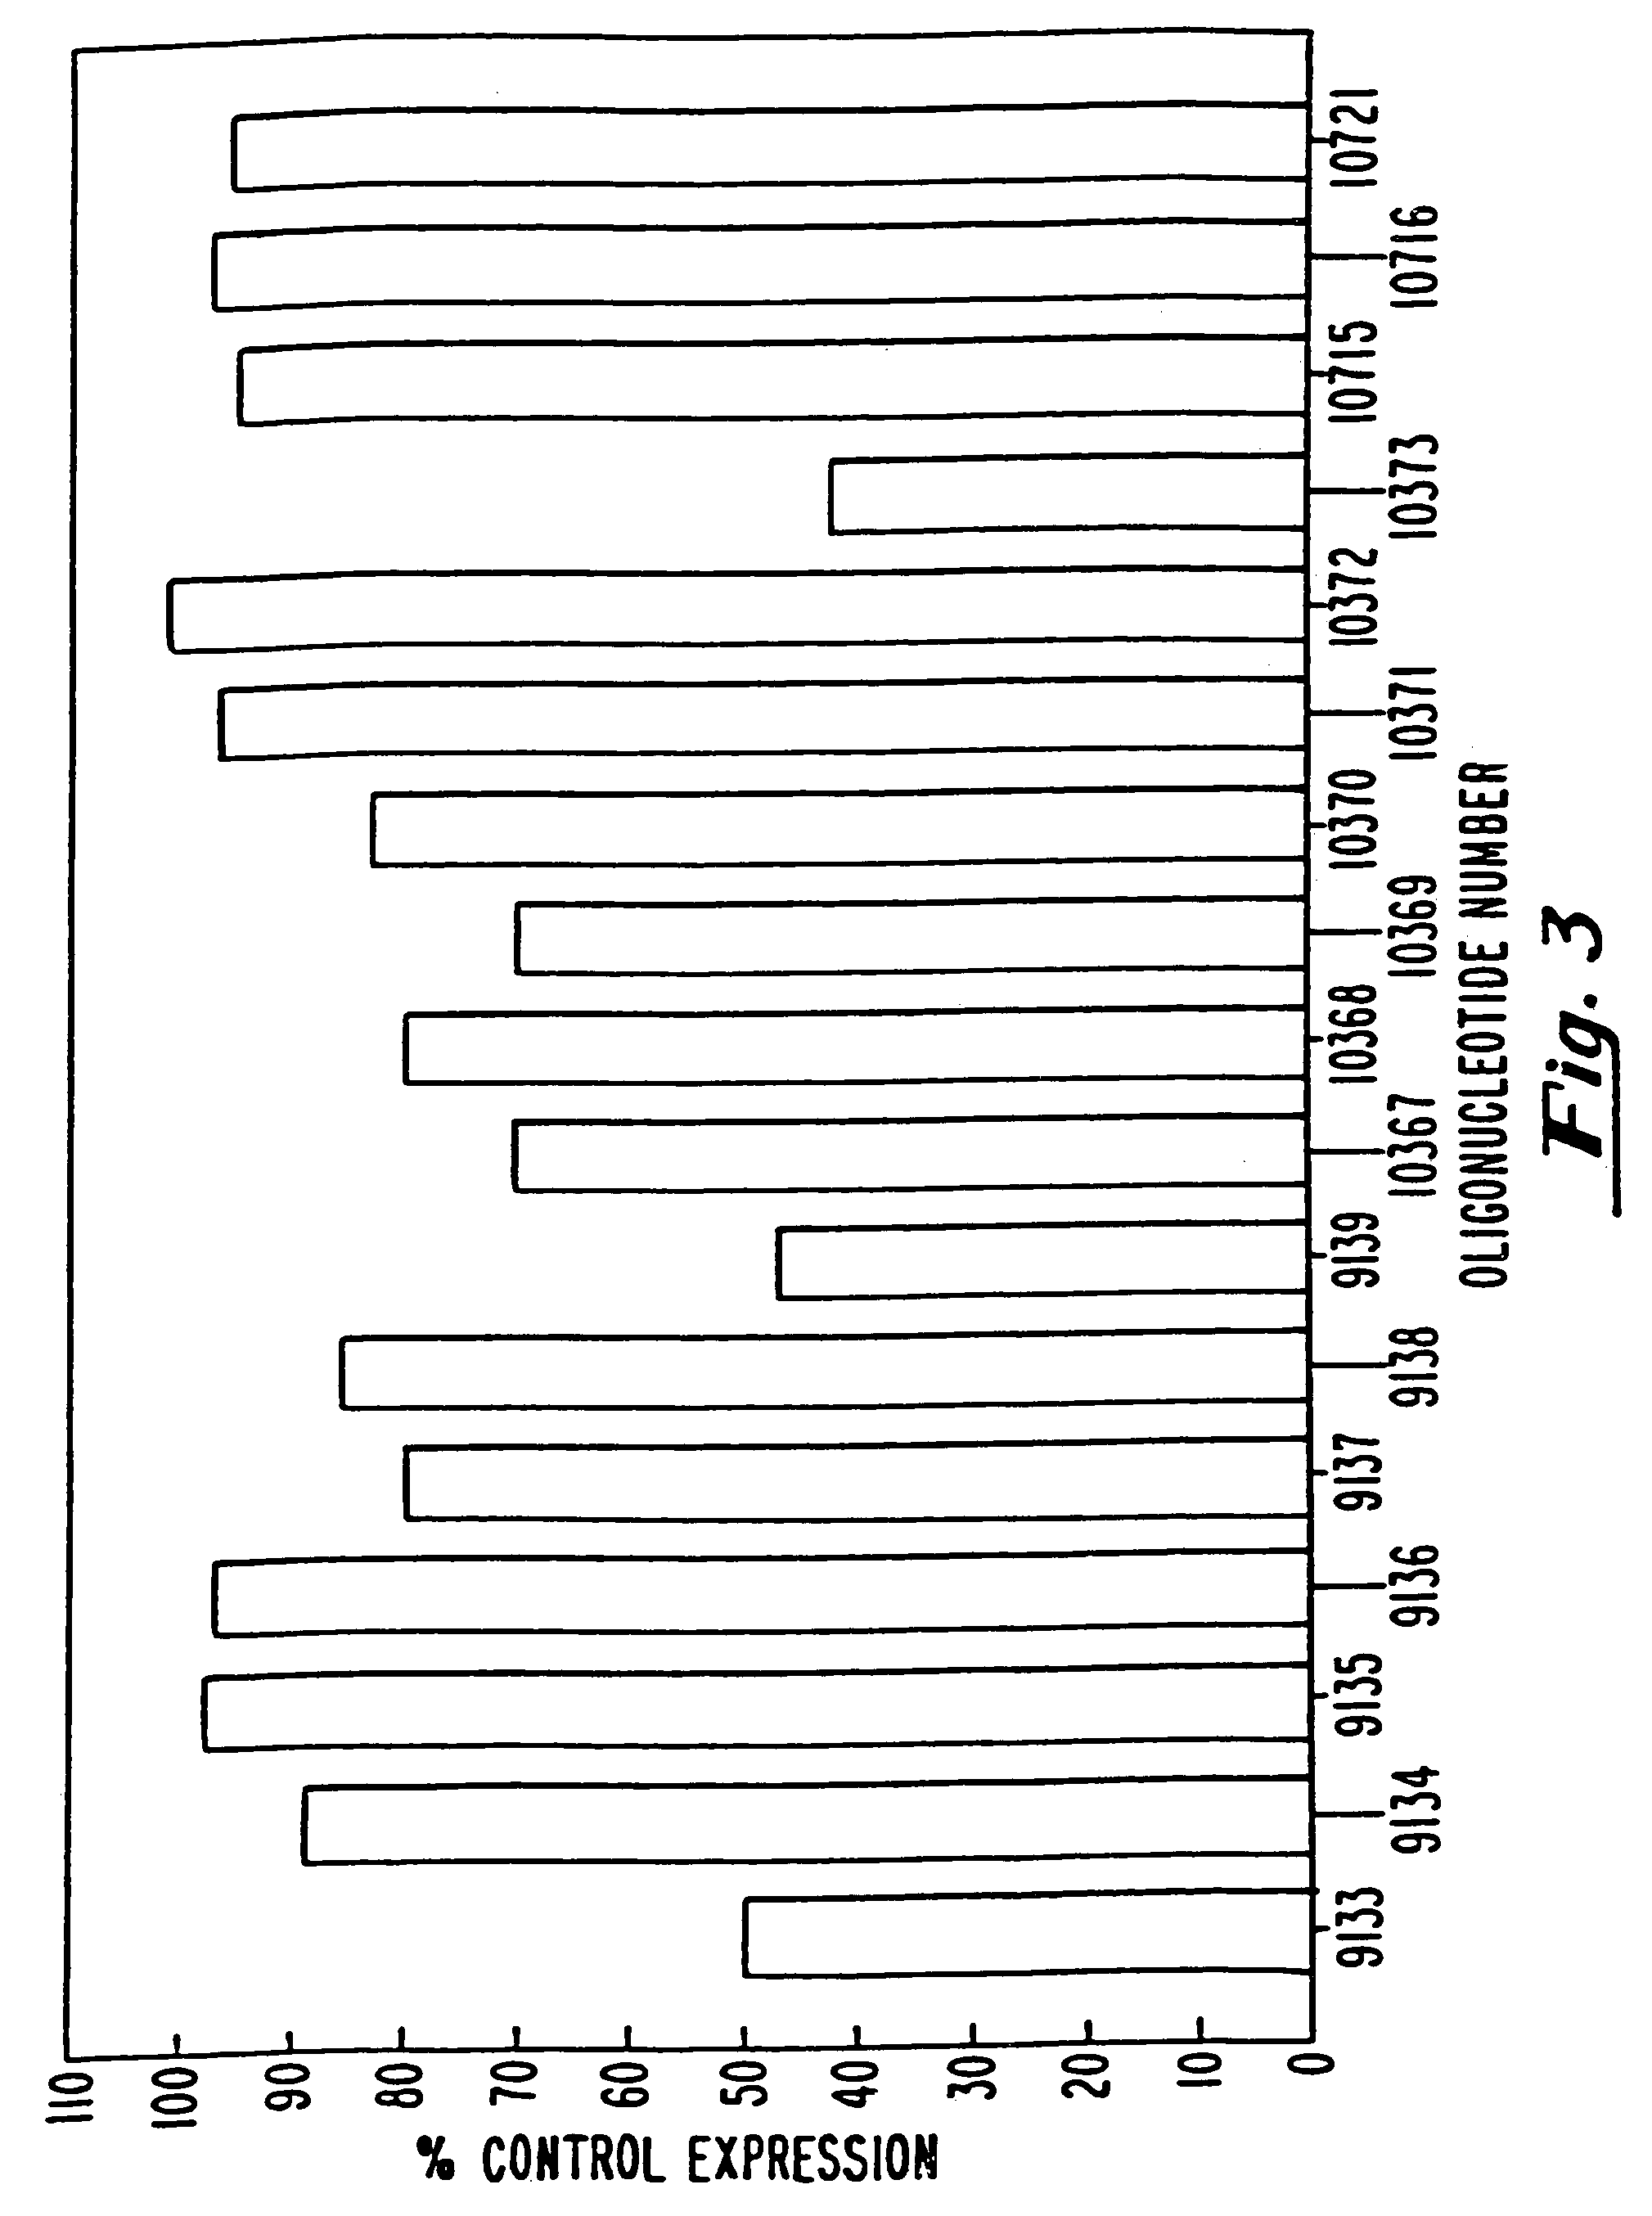 Oligonucleotide compositions and methods for the modulation of the expression of B7 protein